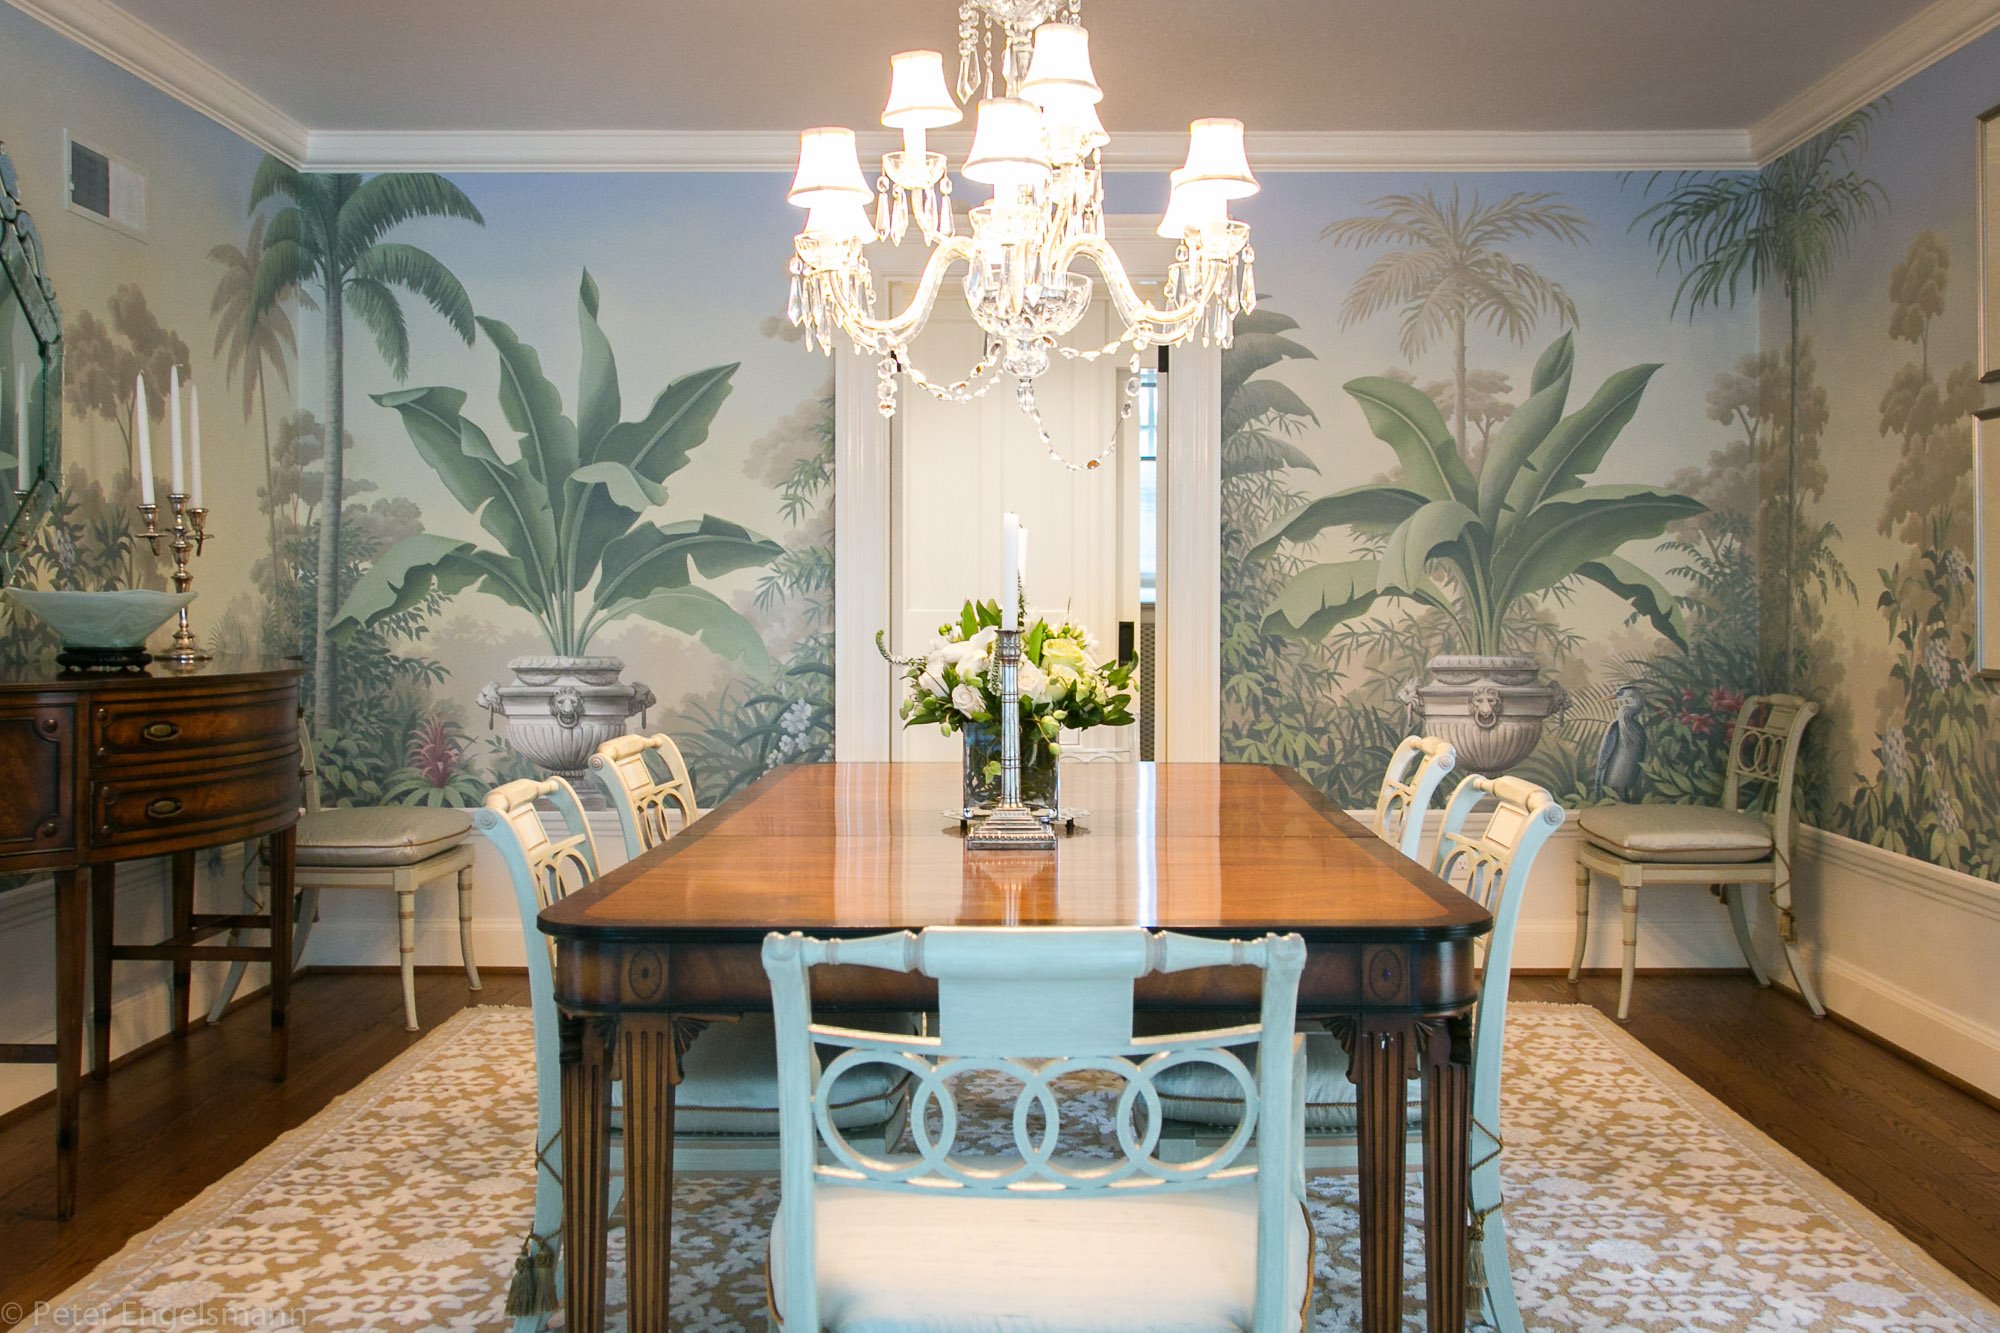  Tropical Dining Room Mural, acrylic on wallboard, private residence. © Peter K. Engelsmann 